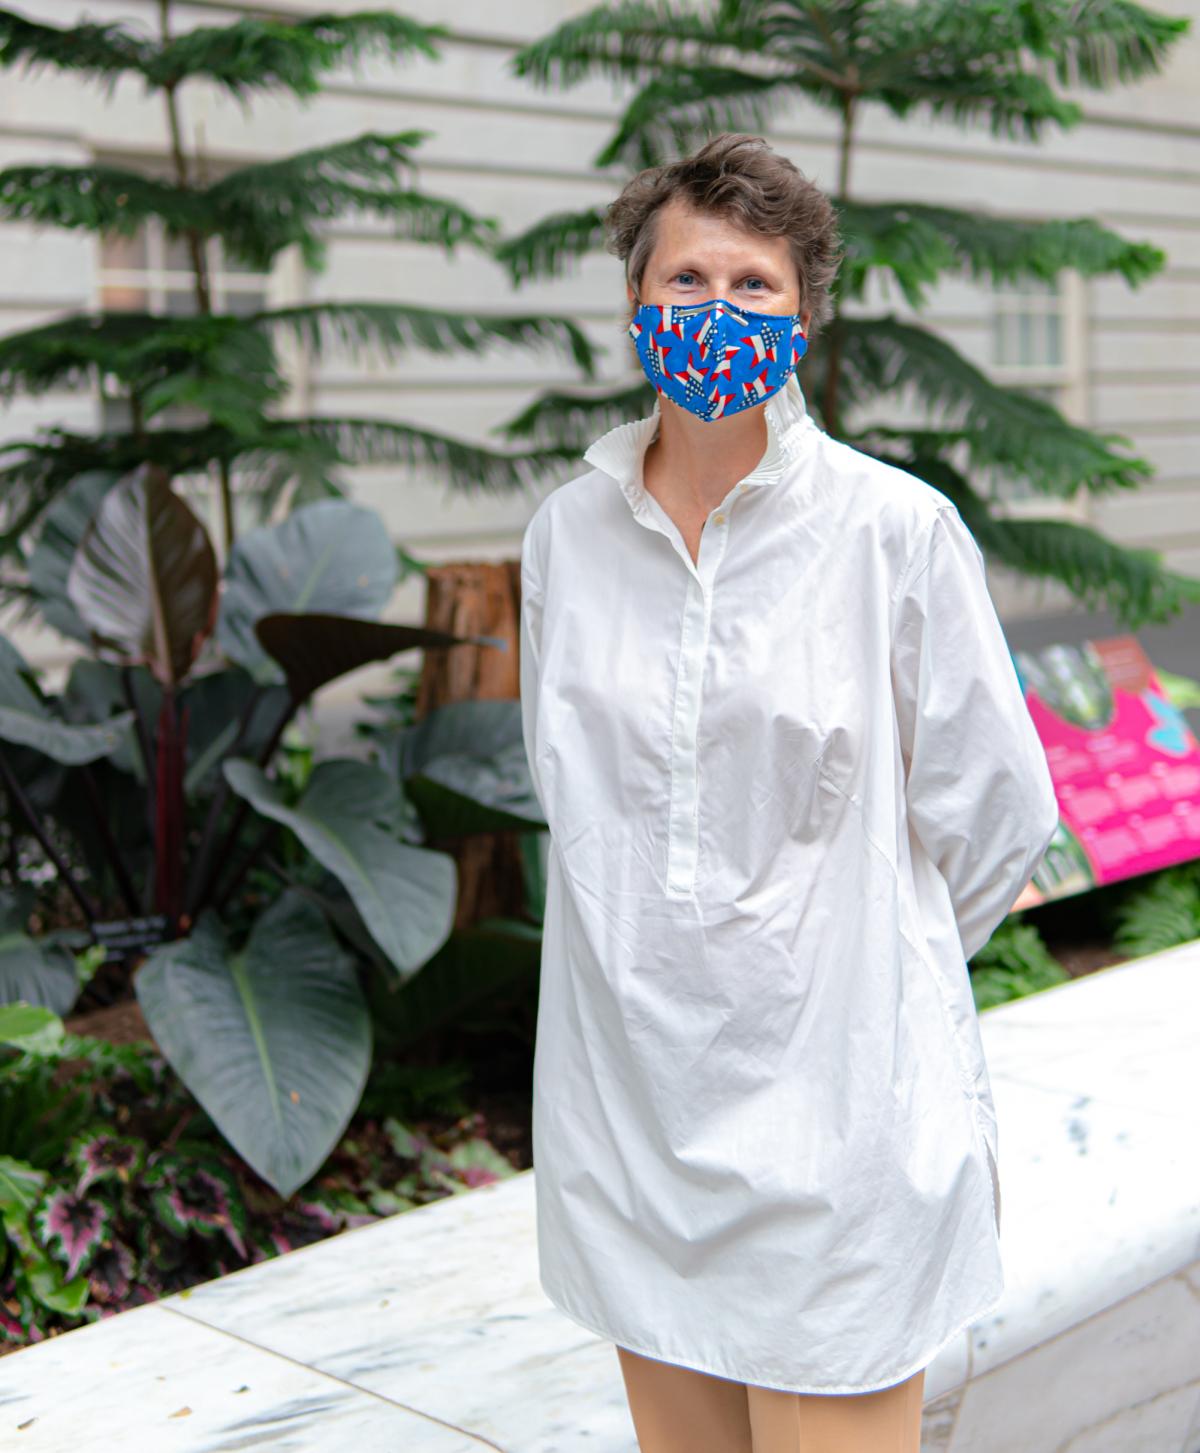 A woman in a blue mask standing in front of plants.